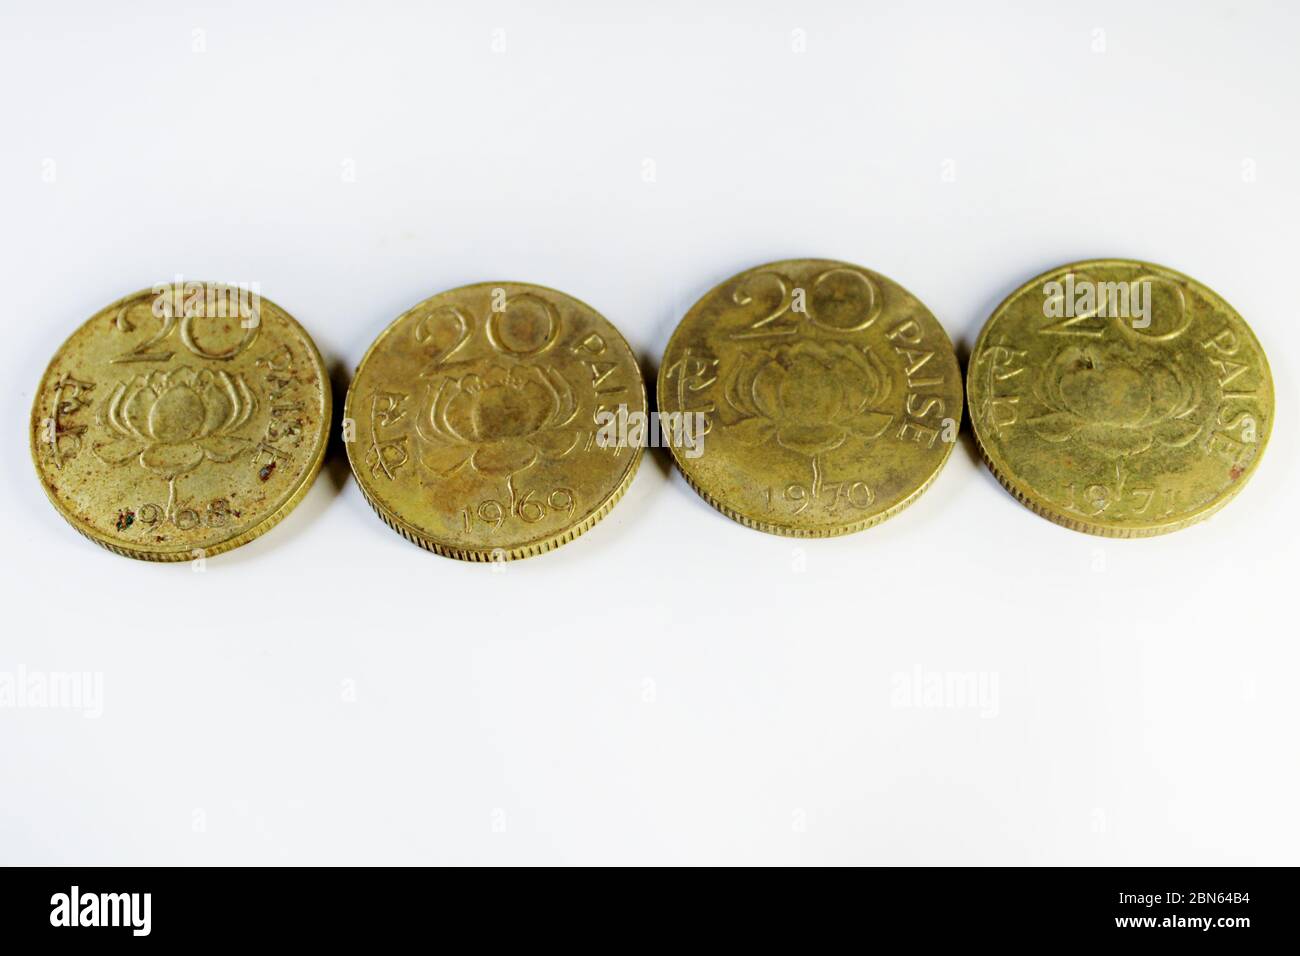 Old Rare Coins Of India Isolated On White Background Stock Photo, Picture  and Royalty Free Image. Image 17092335.